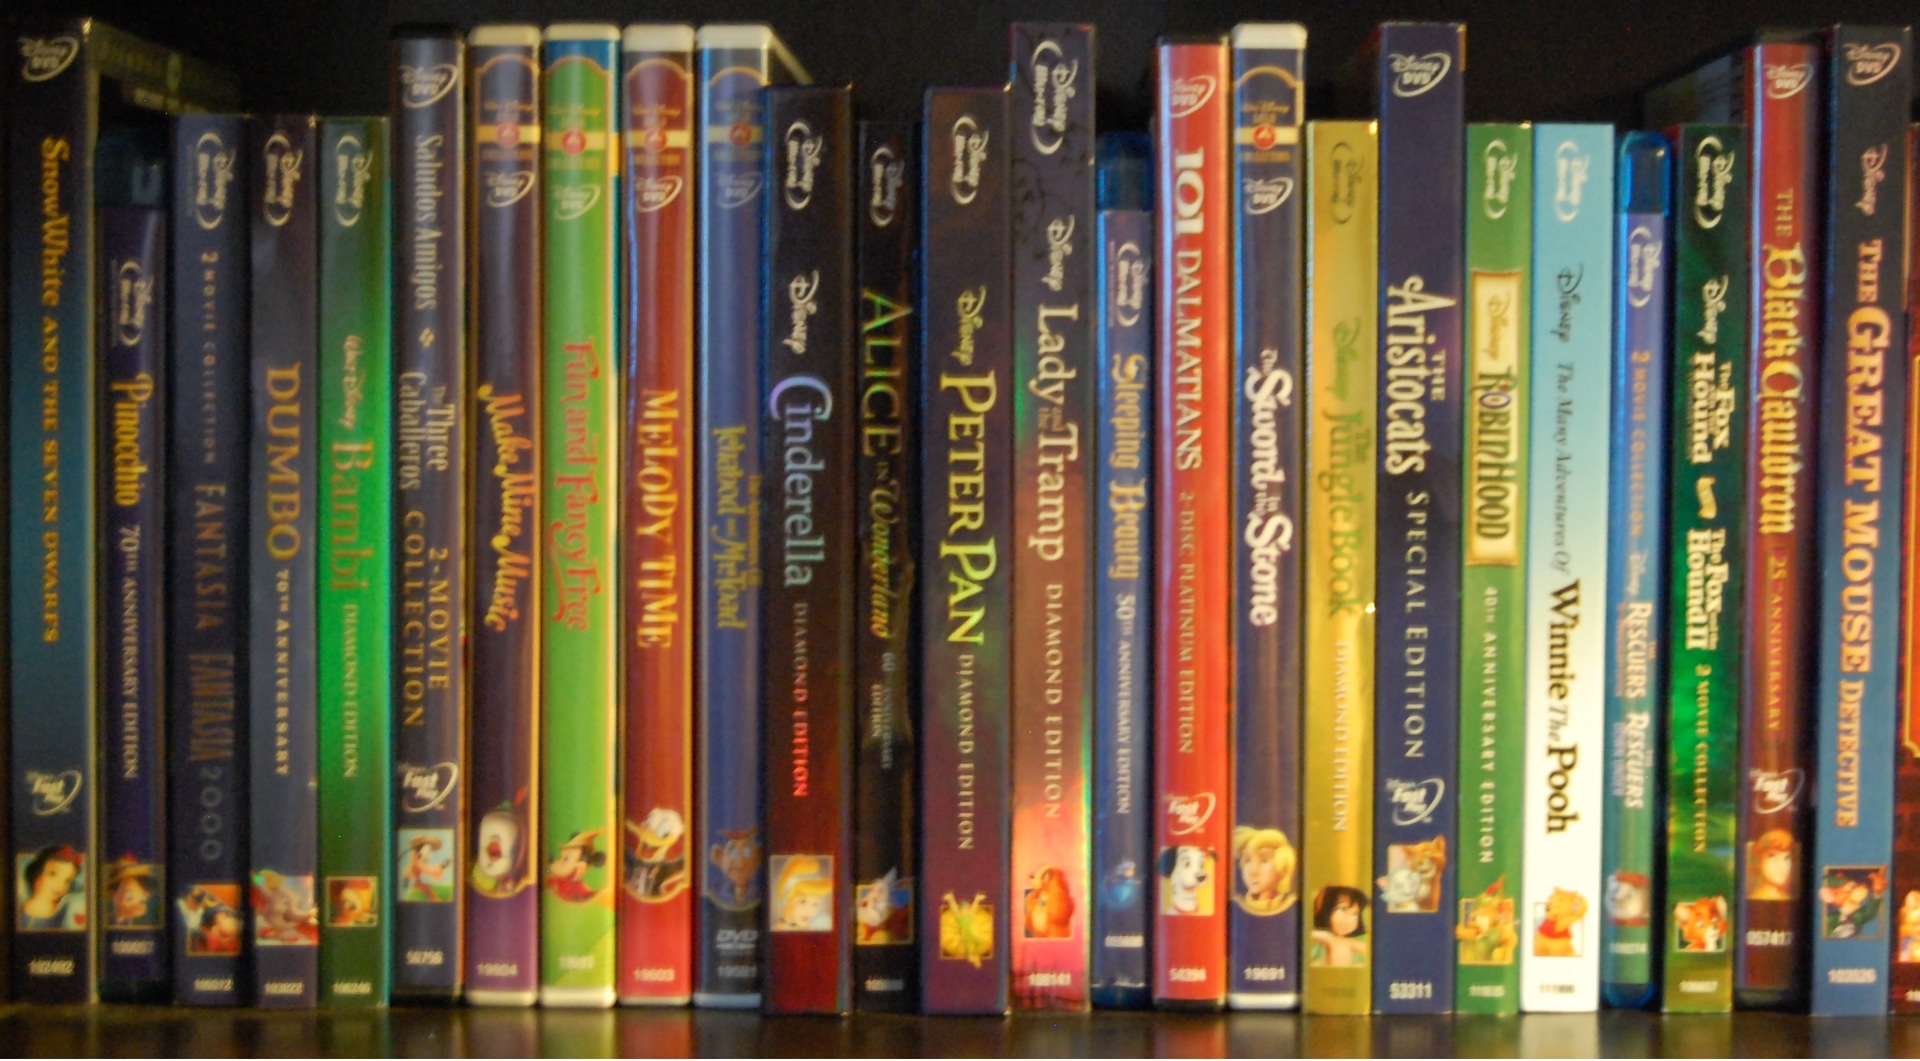 My Disney DVD Collection 